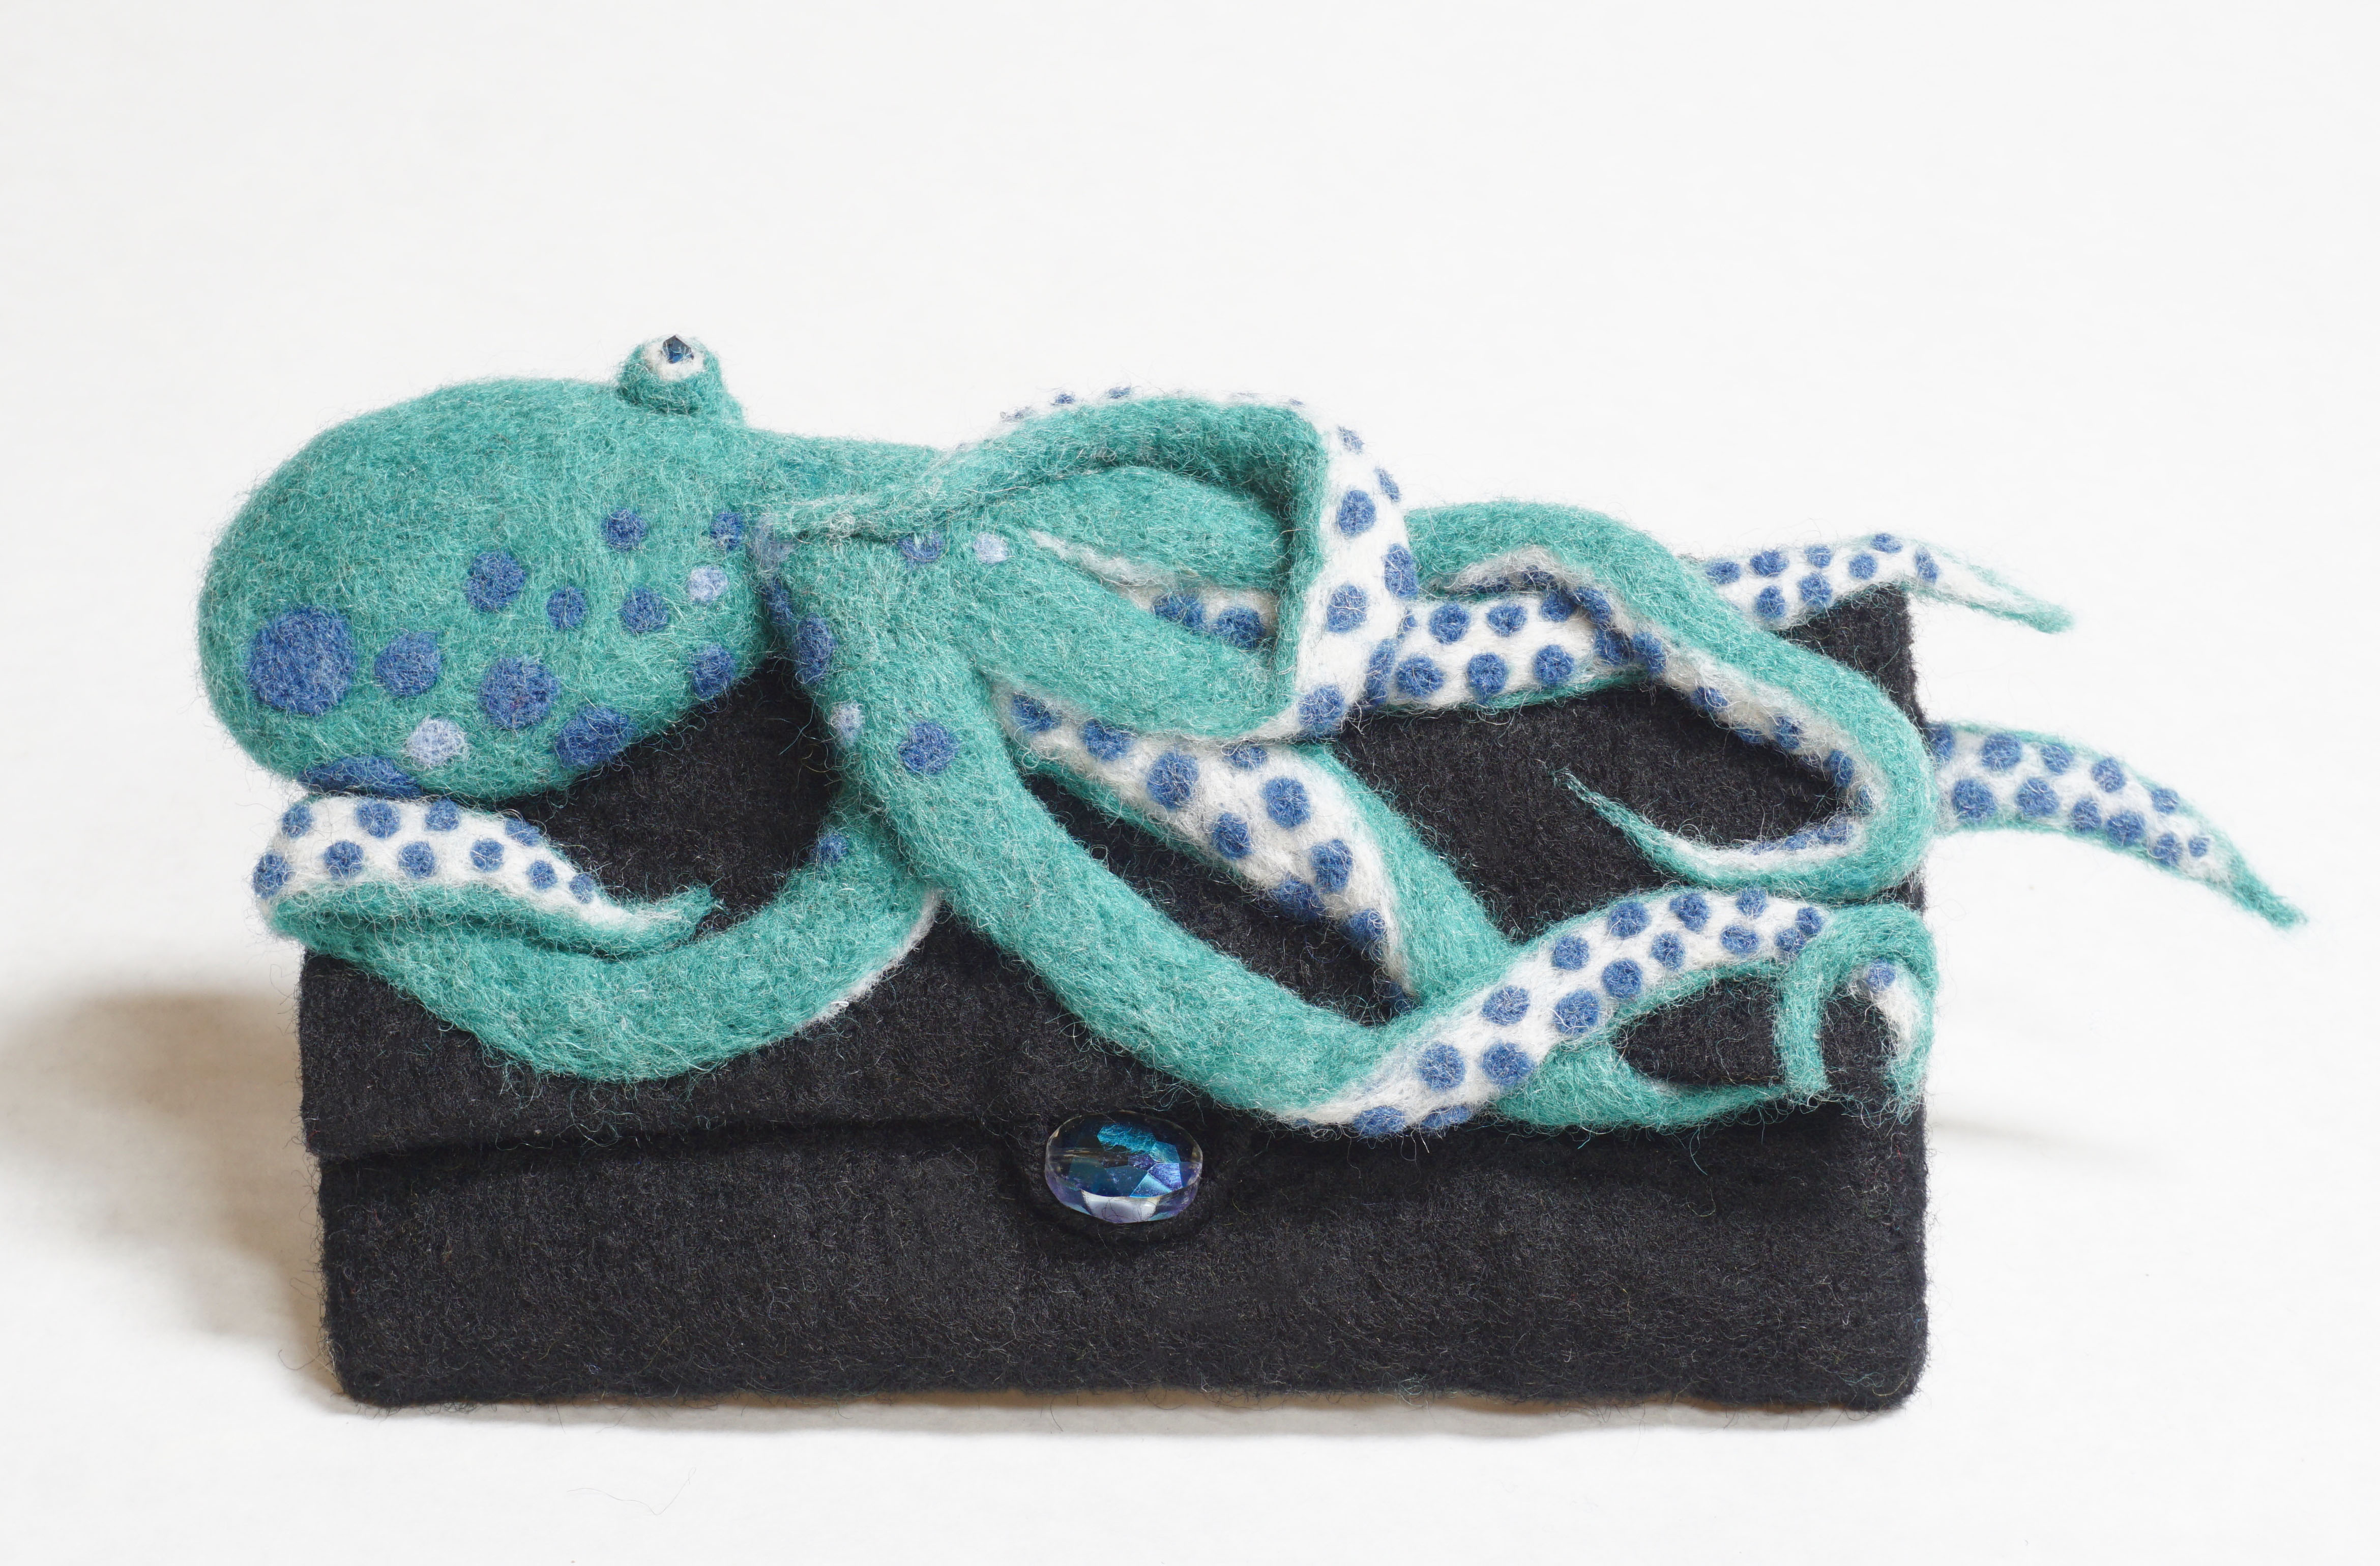 "Clutched" clutch bag with needle felted octopus is something different